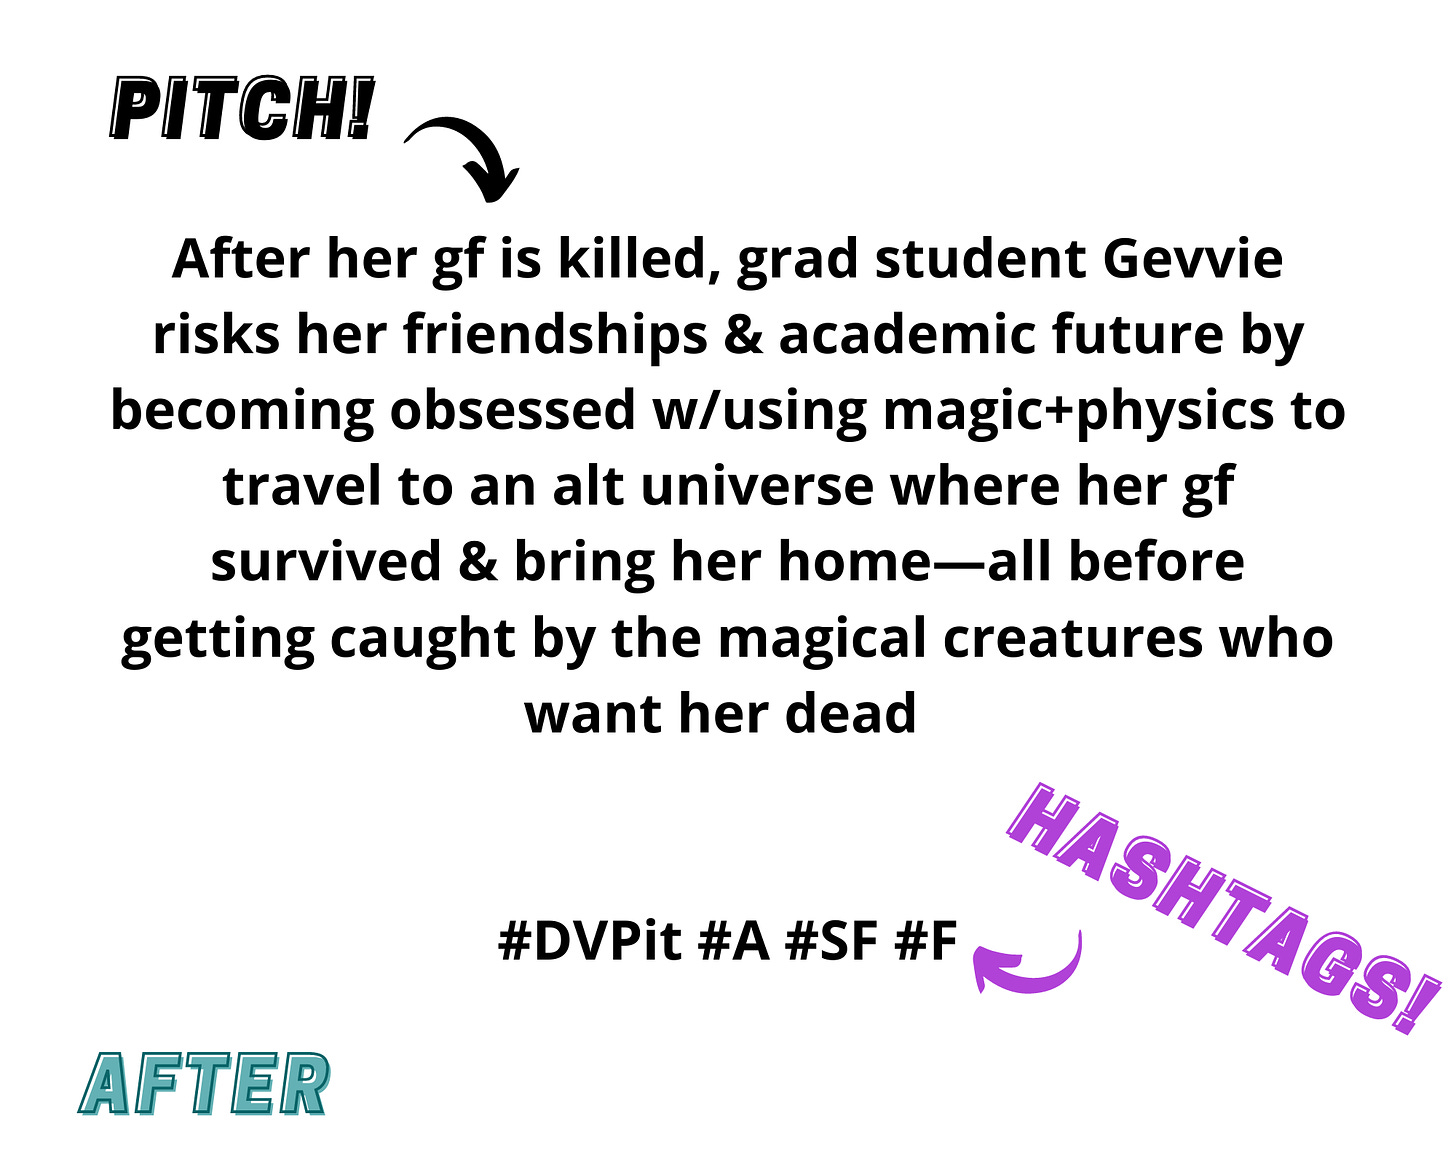 After her gf is killed, grad student Gevvie risks her friendships & academic future by becoming obsessed w/using magic+physics to travel to an alt universe where her gf survived & bring her home—all before getting caught by the magical creatures who want her dead    #DVPit #A #SF #F